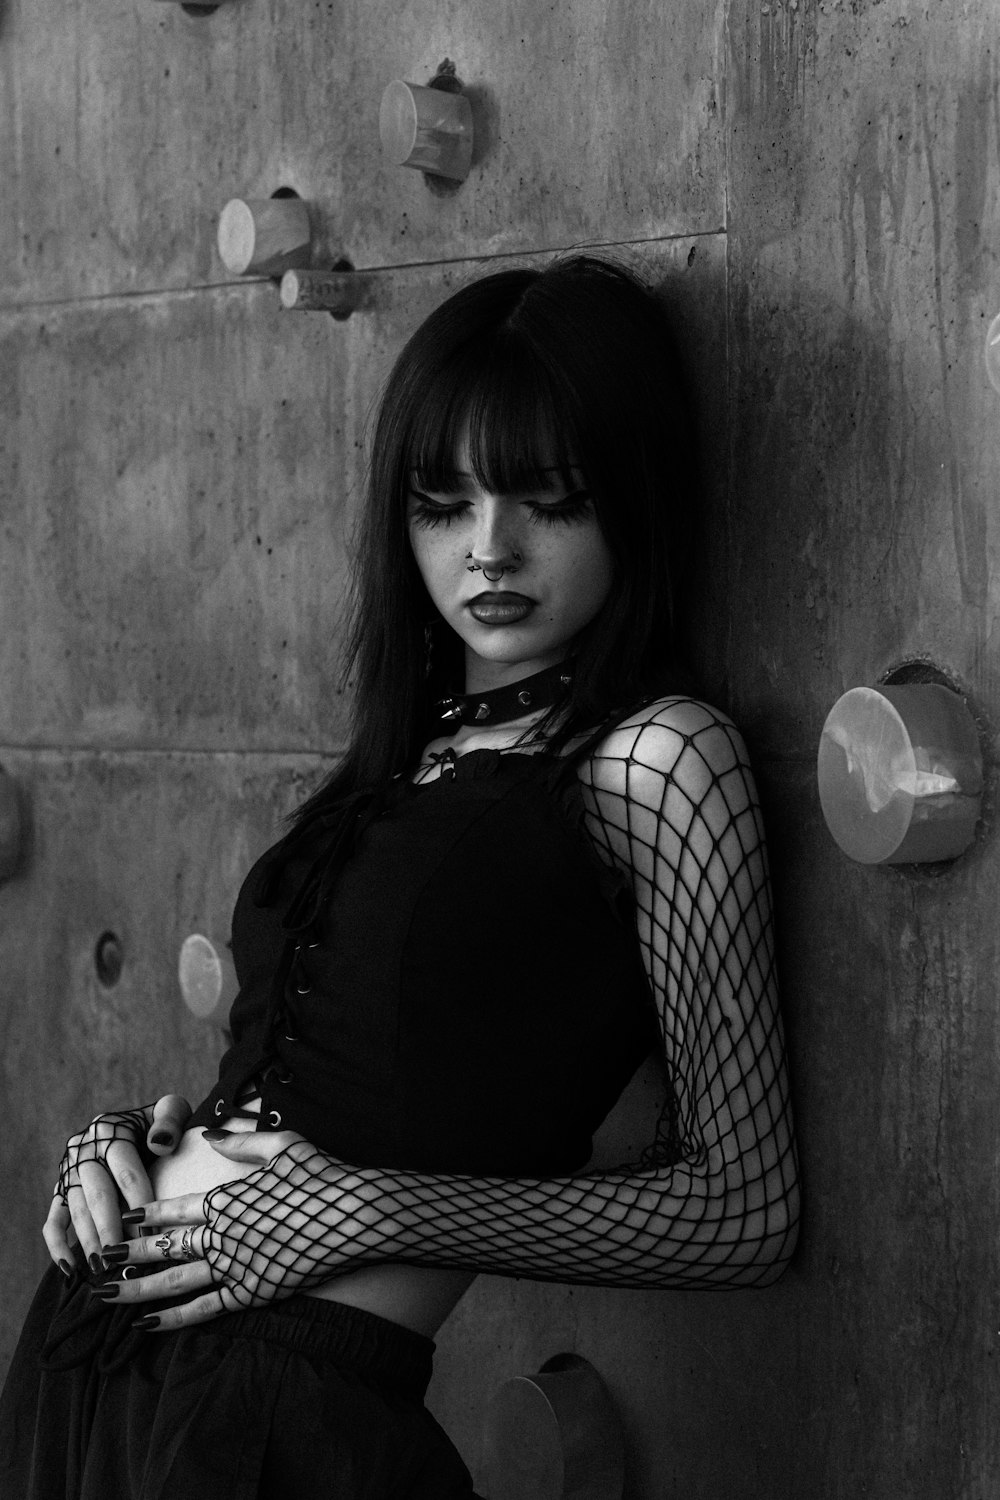 a black and white photo of a woman wearing fishnet stockings